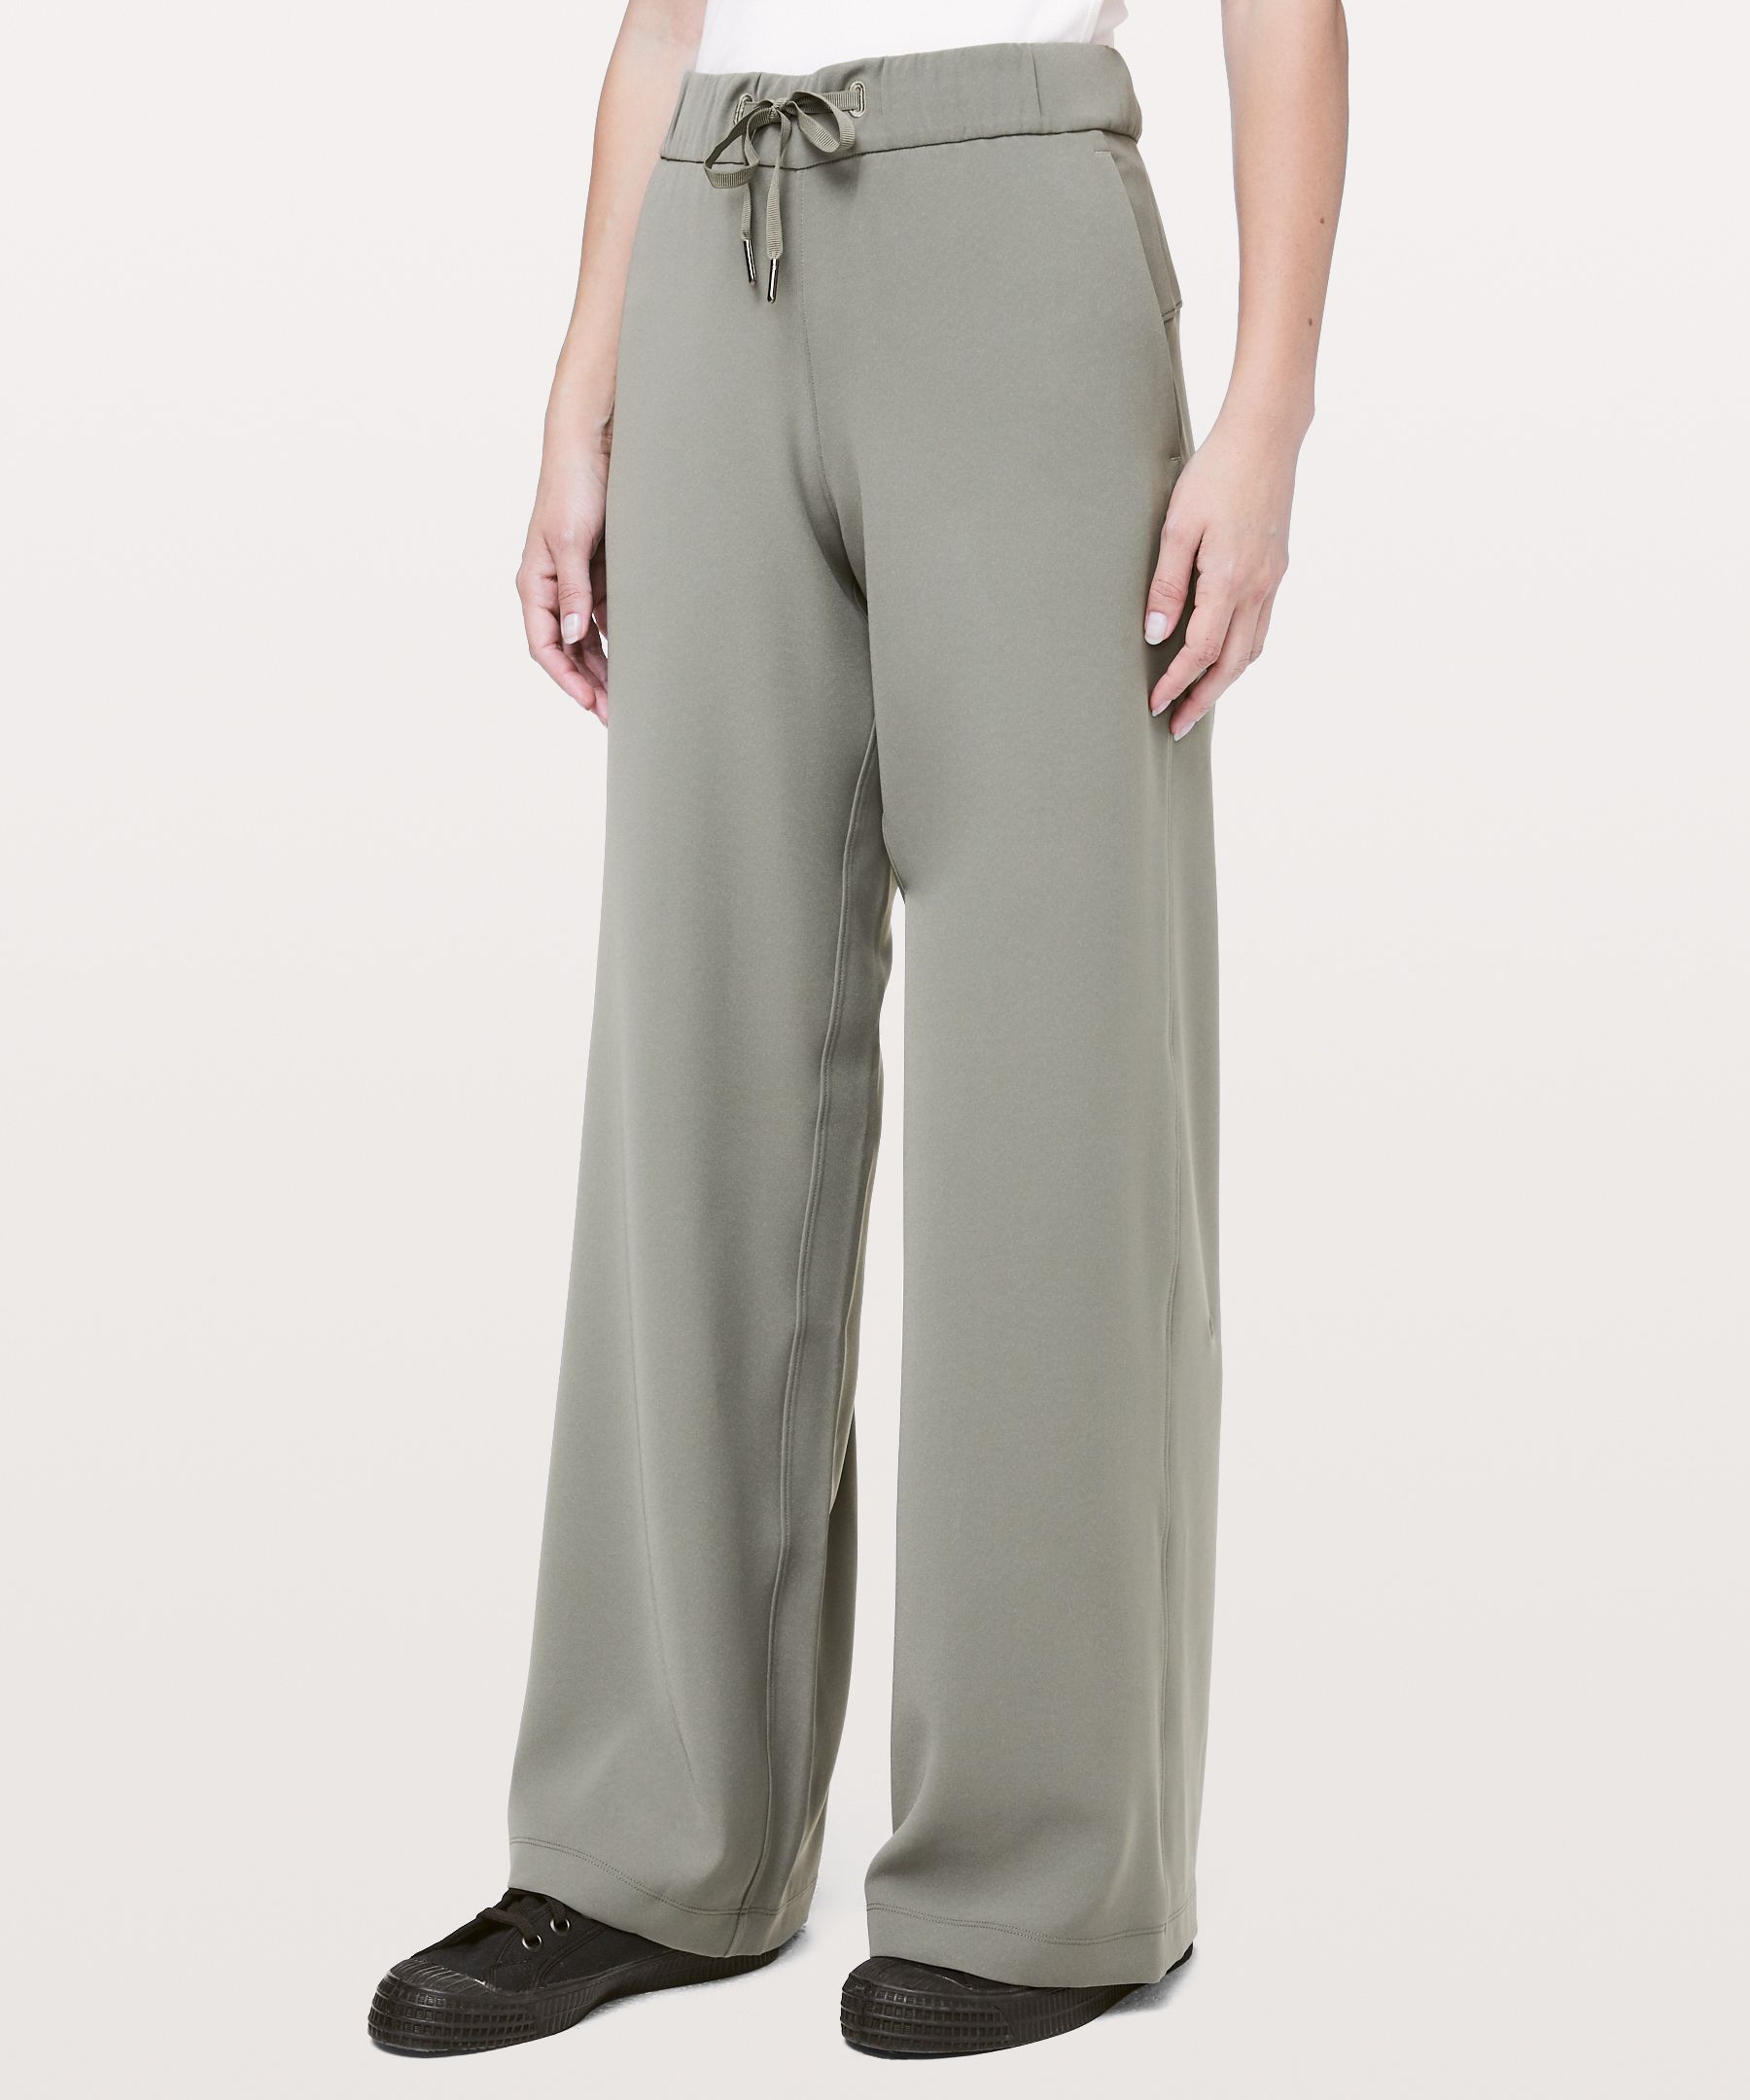 Lululemon On the Fly Wide-Leg Pant Woven Frontier